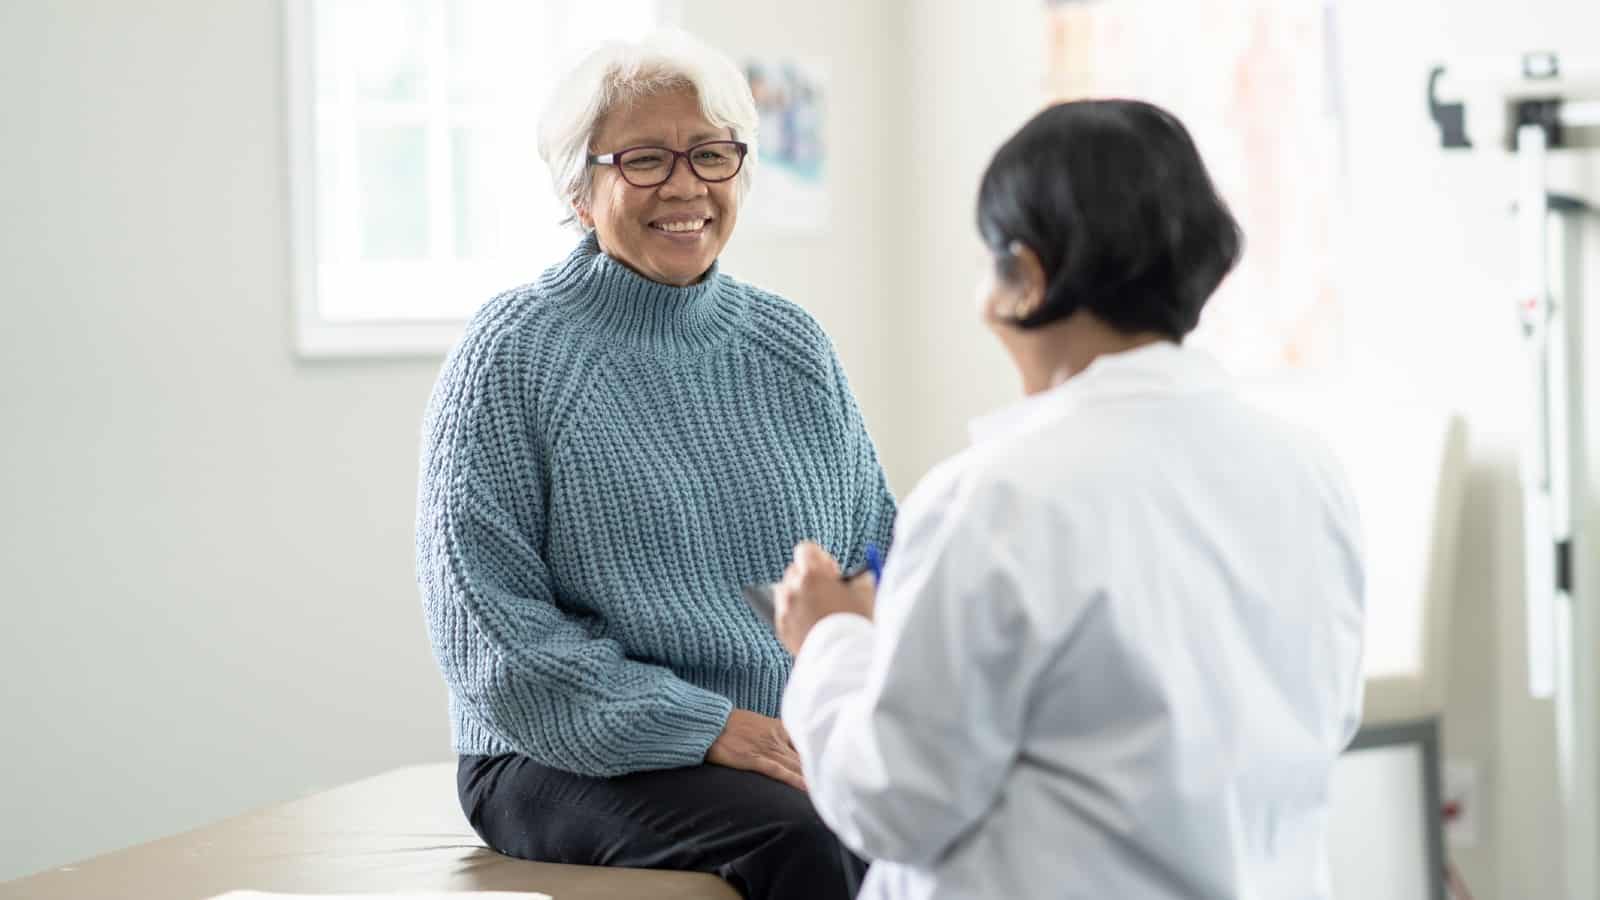 A senior woman sits up on the exam table at a doctors appointment. She is dressed casually in a blue sweater and has a smile on her face as she glances at the doctor. Her female doctor is wearing a white lab coat and seated in front of her as she takes notes on a tablet.